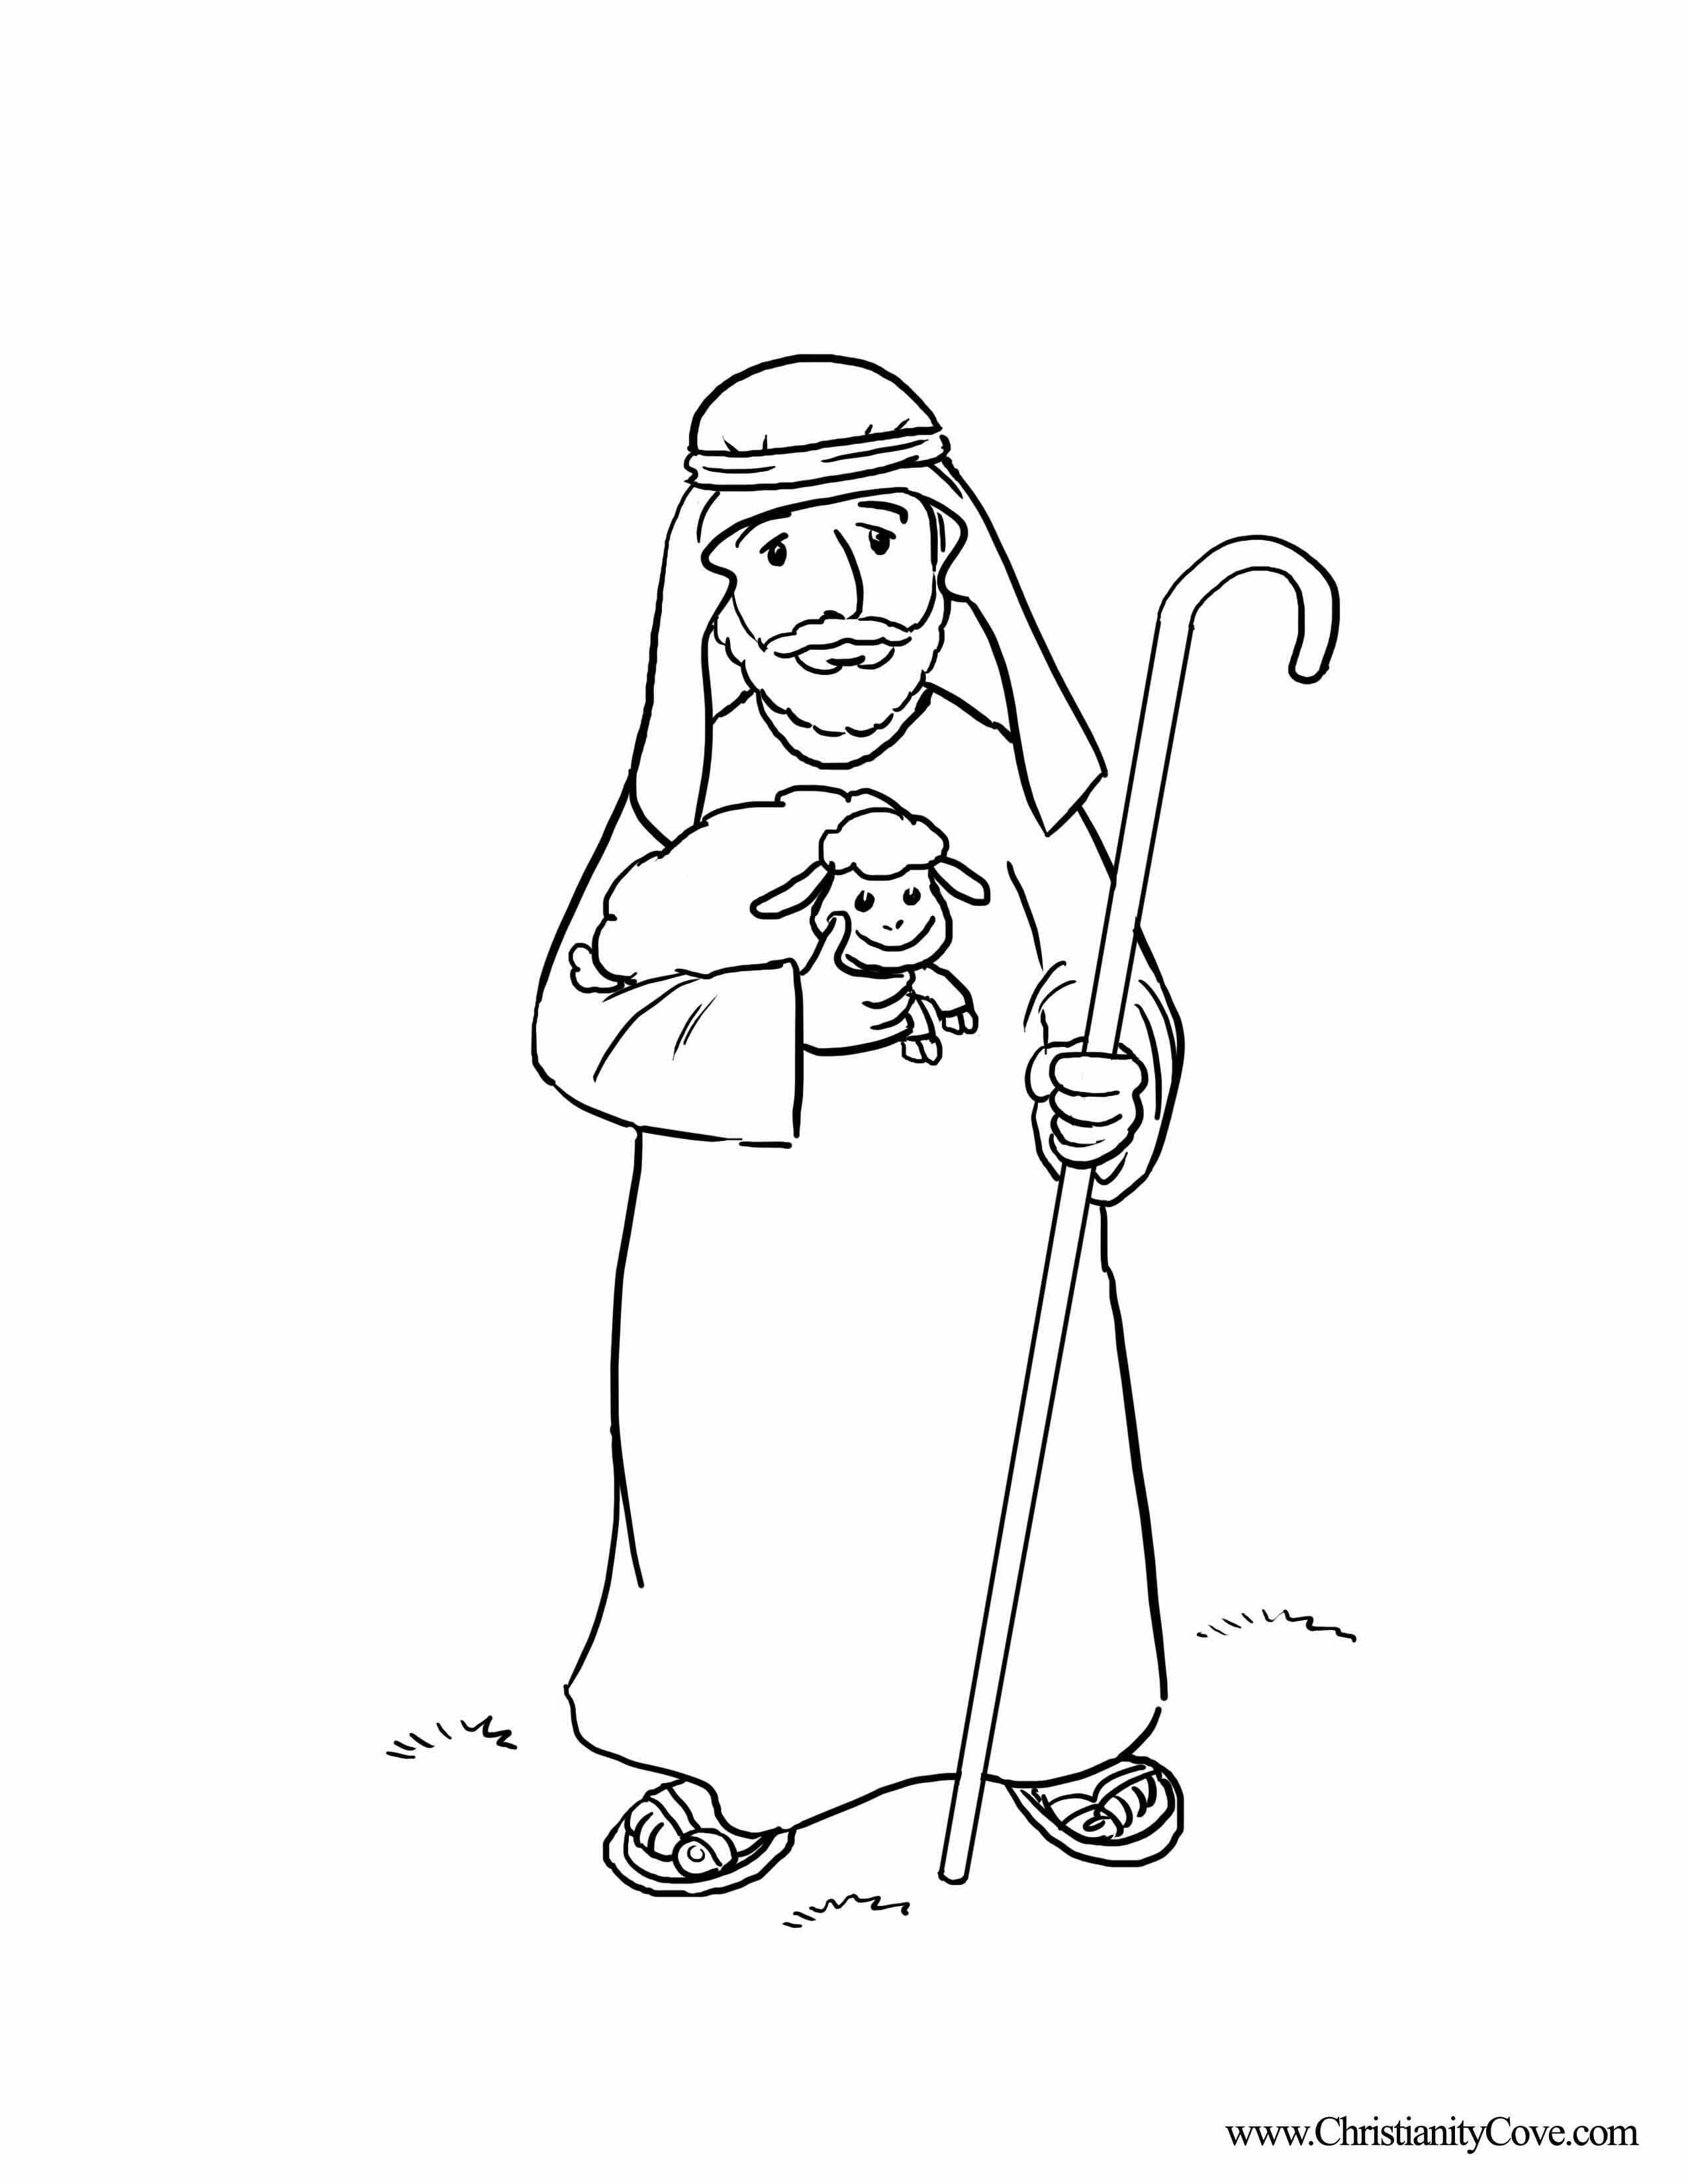 Bible printables coloring pages for sunday school